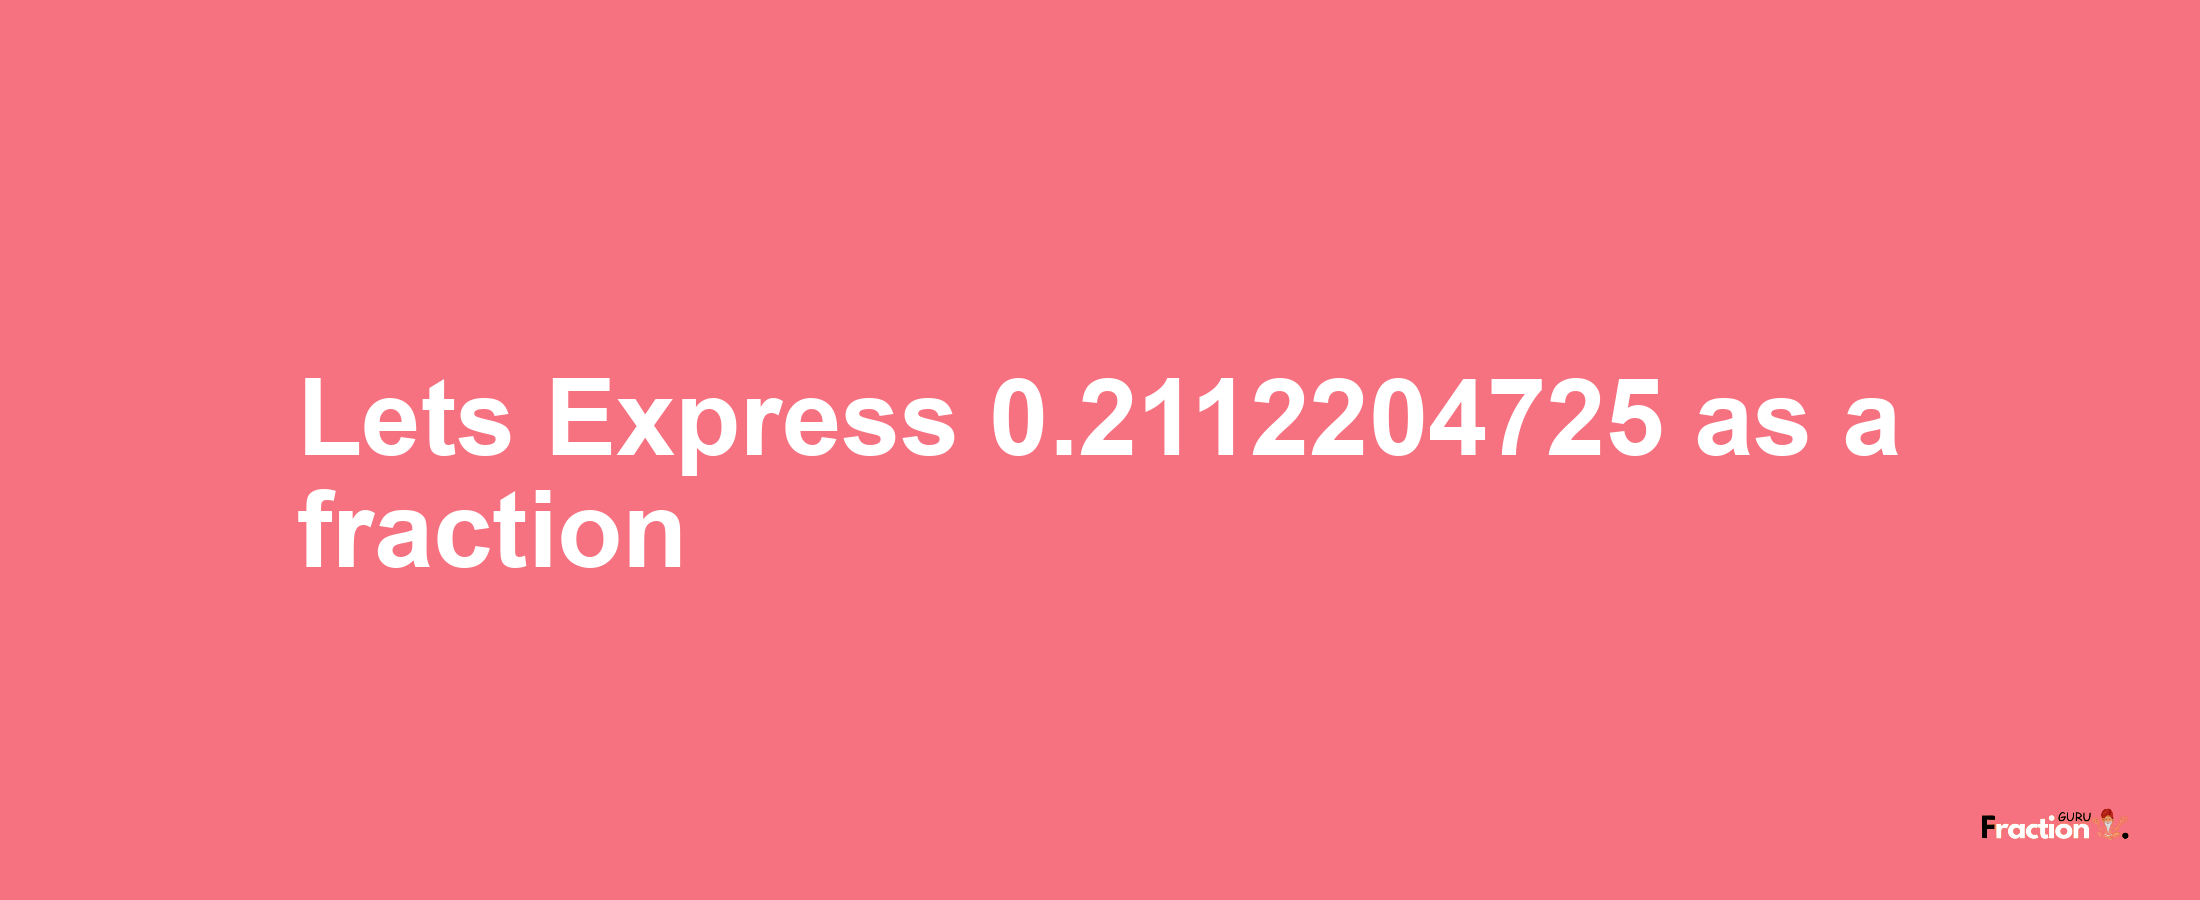 Lets Express 0.2112204725 as afraction